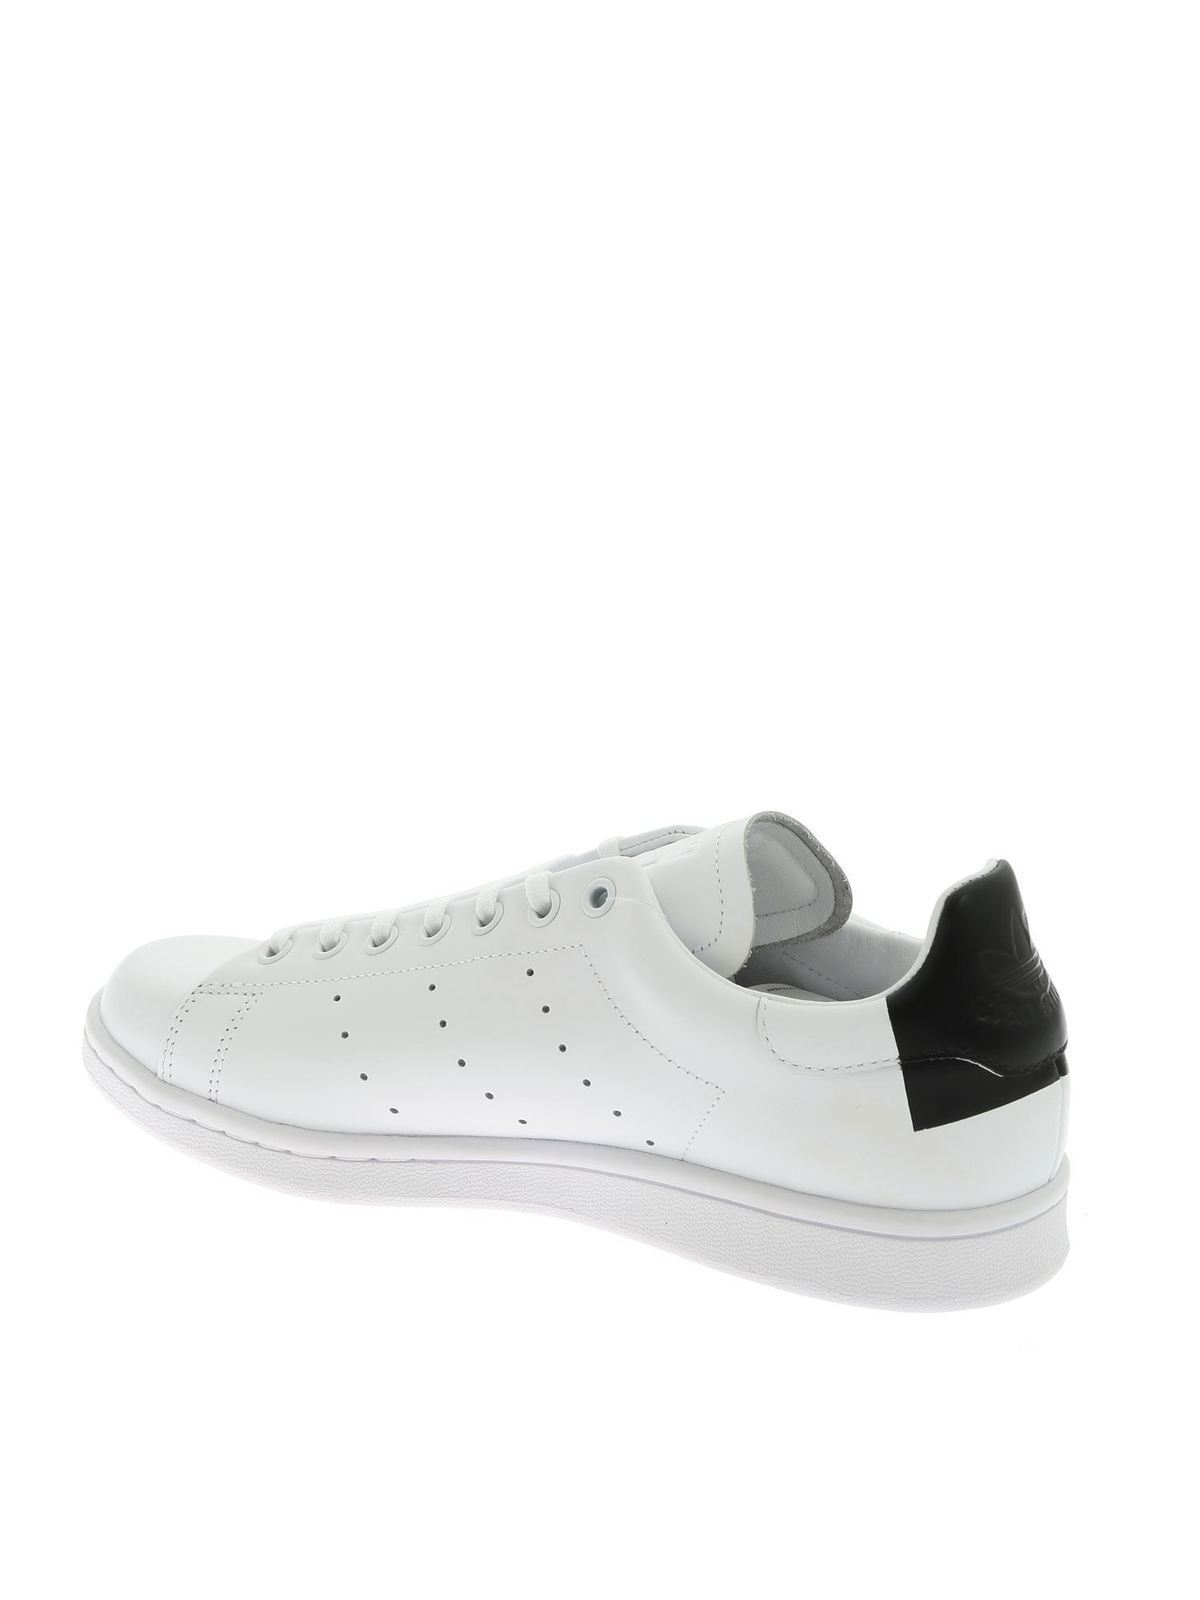 adidas originals stan smith white and black trainers